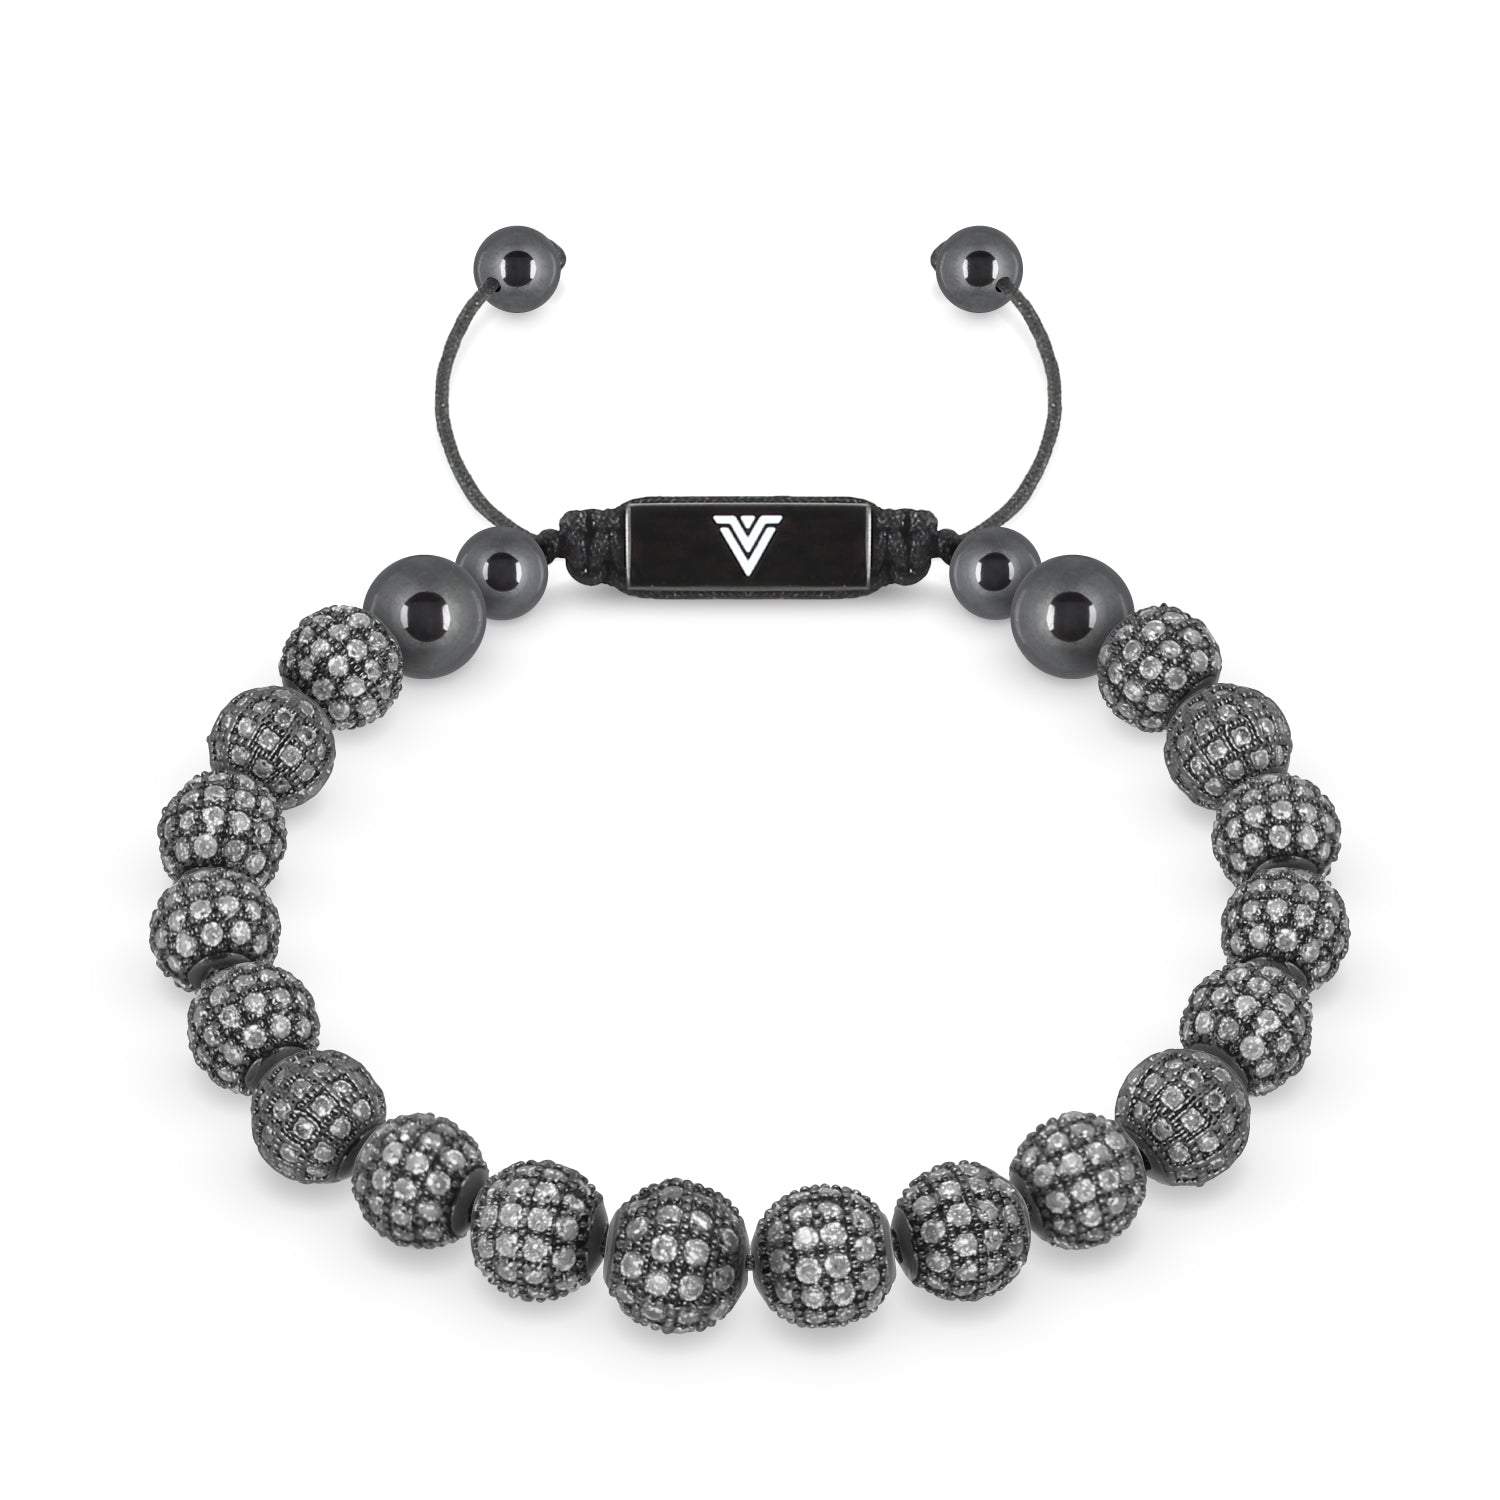 Front view of an 8mm Steel Pave crystal beaded shamballa bracelet with black stainless steel logo bead made by Voltlin